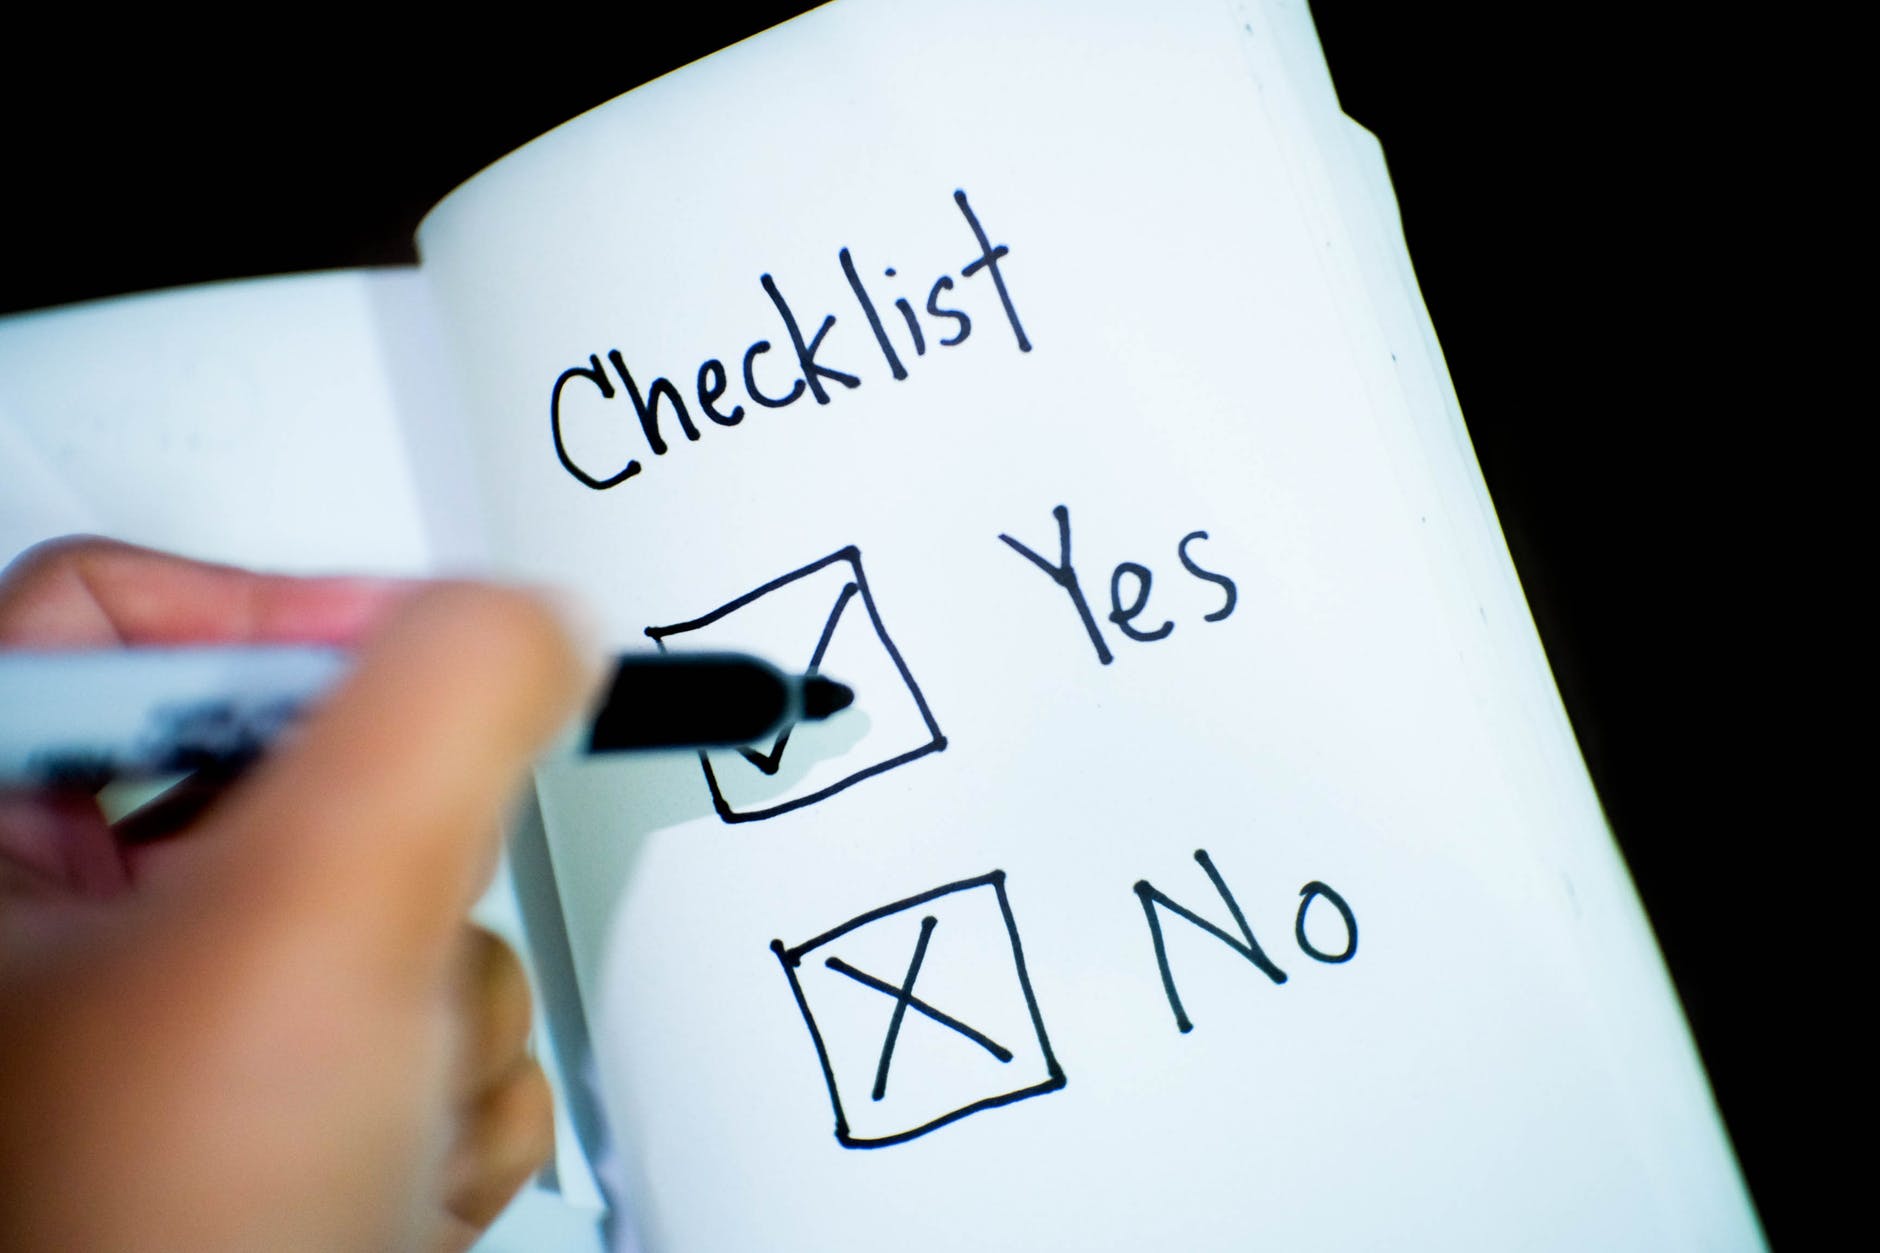 Hand checking the yes box in a yes/no checklist